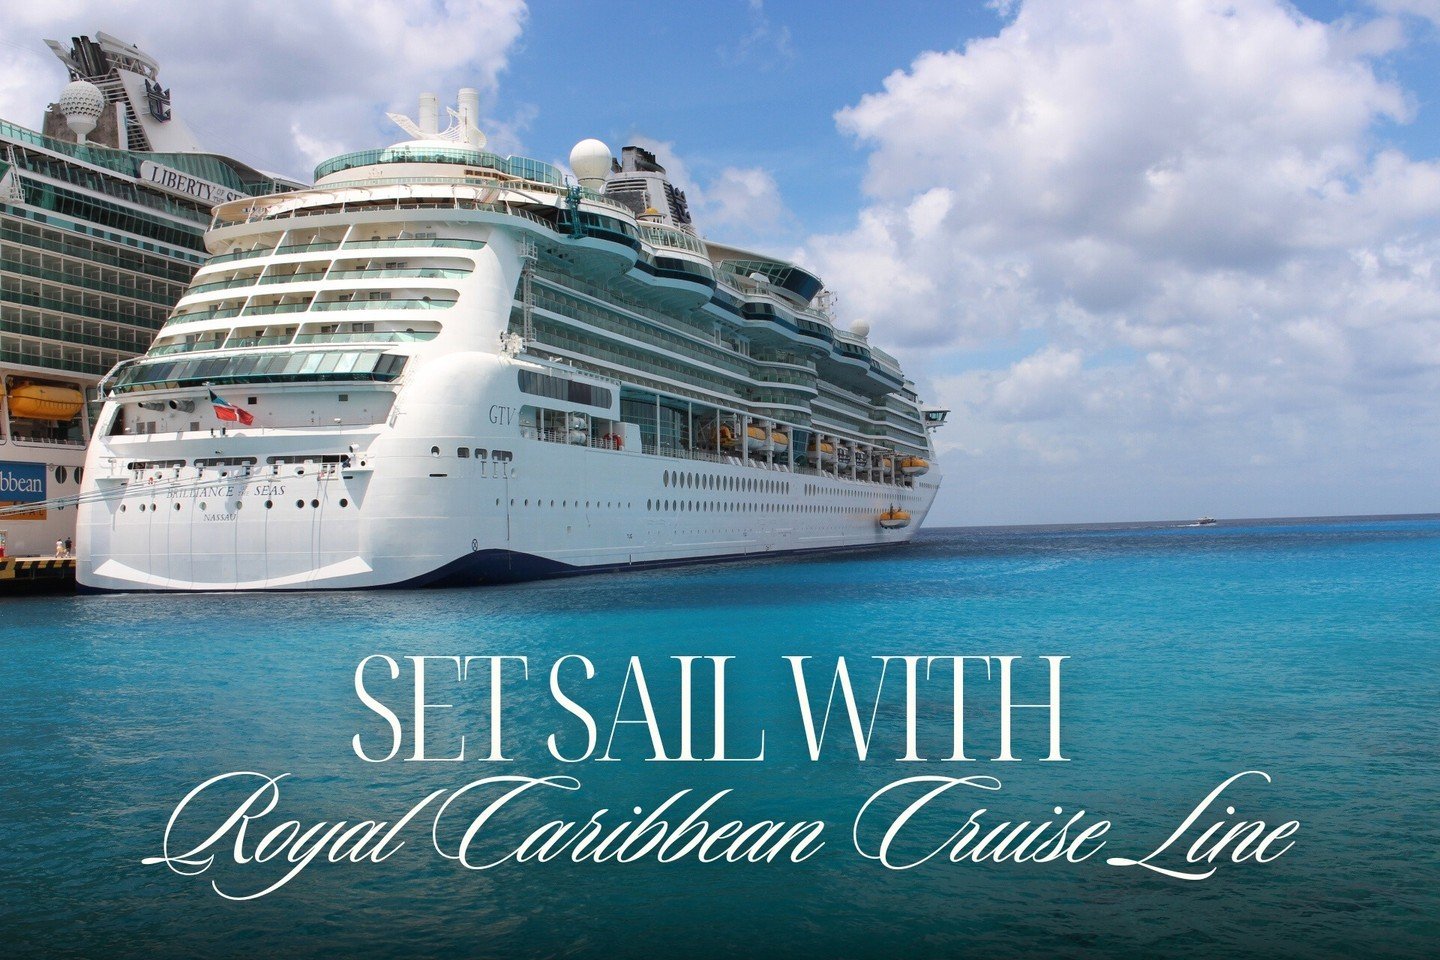 Ready to set sail on your next adventure?  Royal Caribbean Cruise Line has been a favorite of ours for years!  The rooms are beautiful, the dining is delicious, the entertainment is incredible and the destinations are stunning! ⁠
⁠
If you've been dre